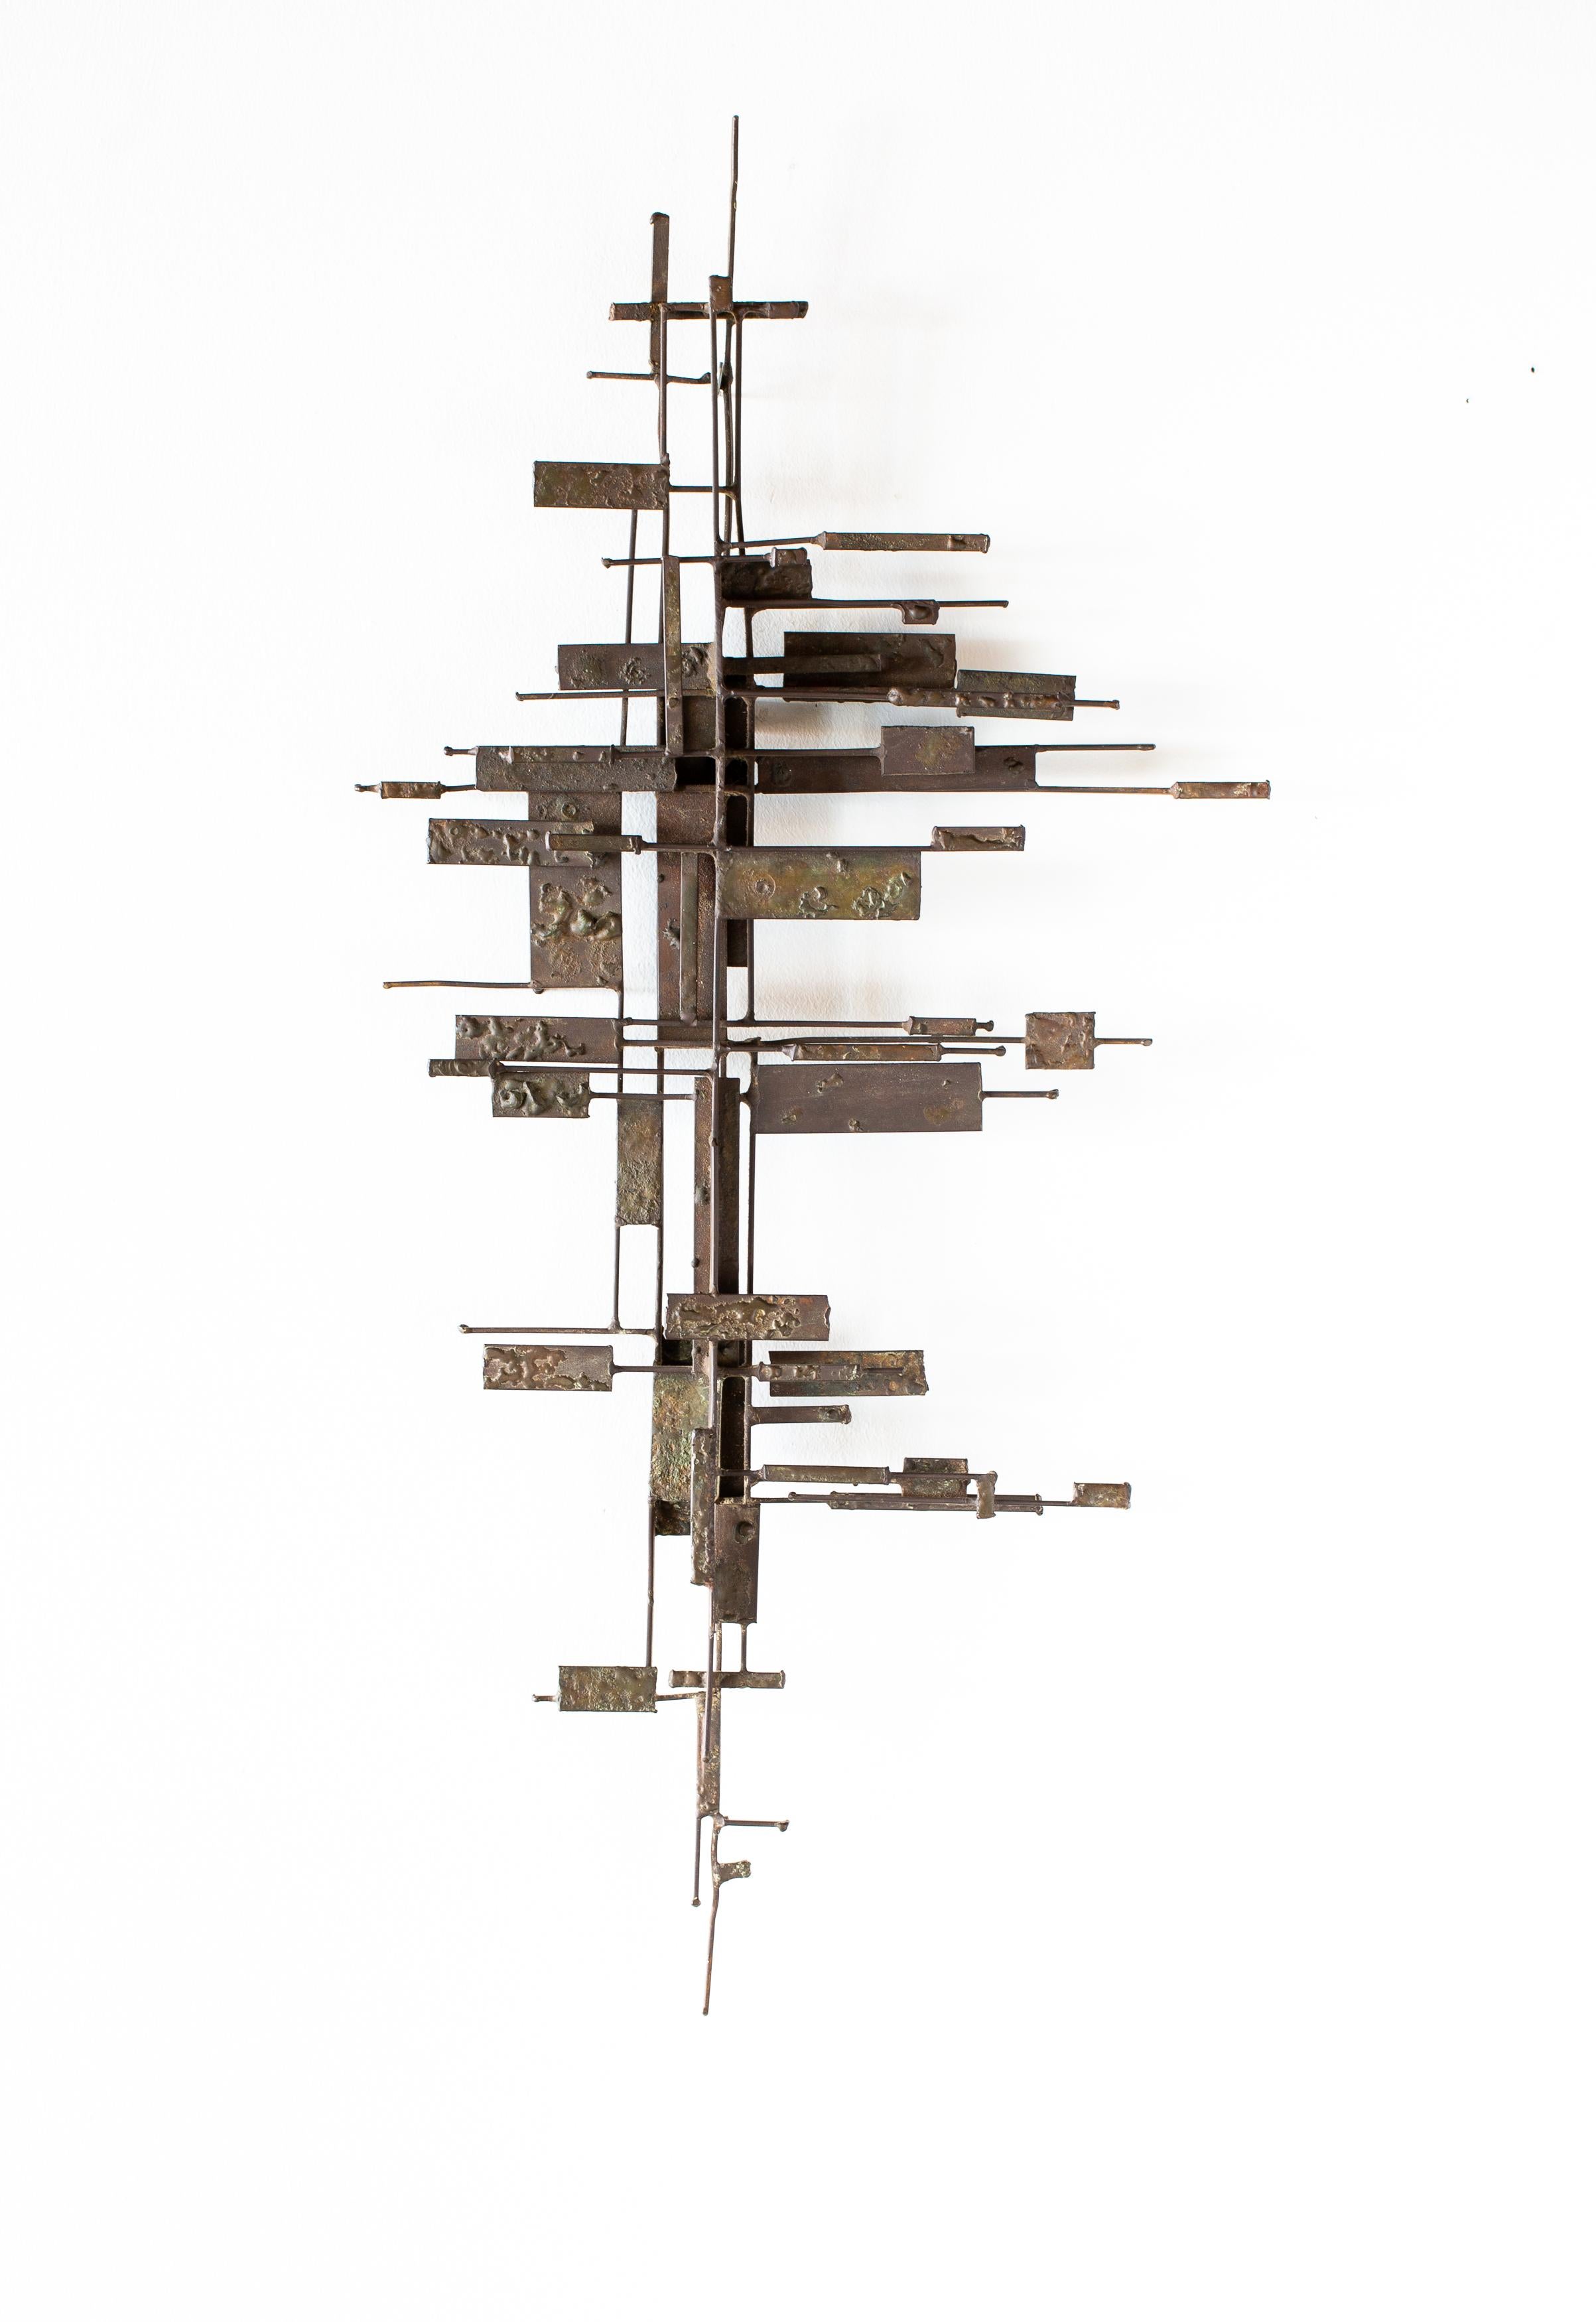 Rare vintage abstract/contemporary steel wall sculpture created by Jack Boyd of San Diego, California early 1960’s. This one of a kind sculpture is created with intricate plates of steel stacked together and accompanied by bronze textured welding.